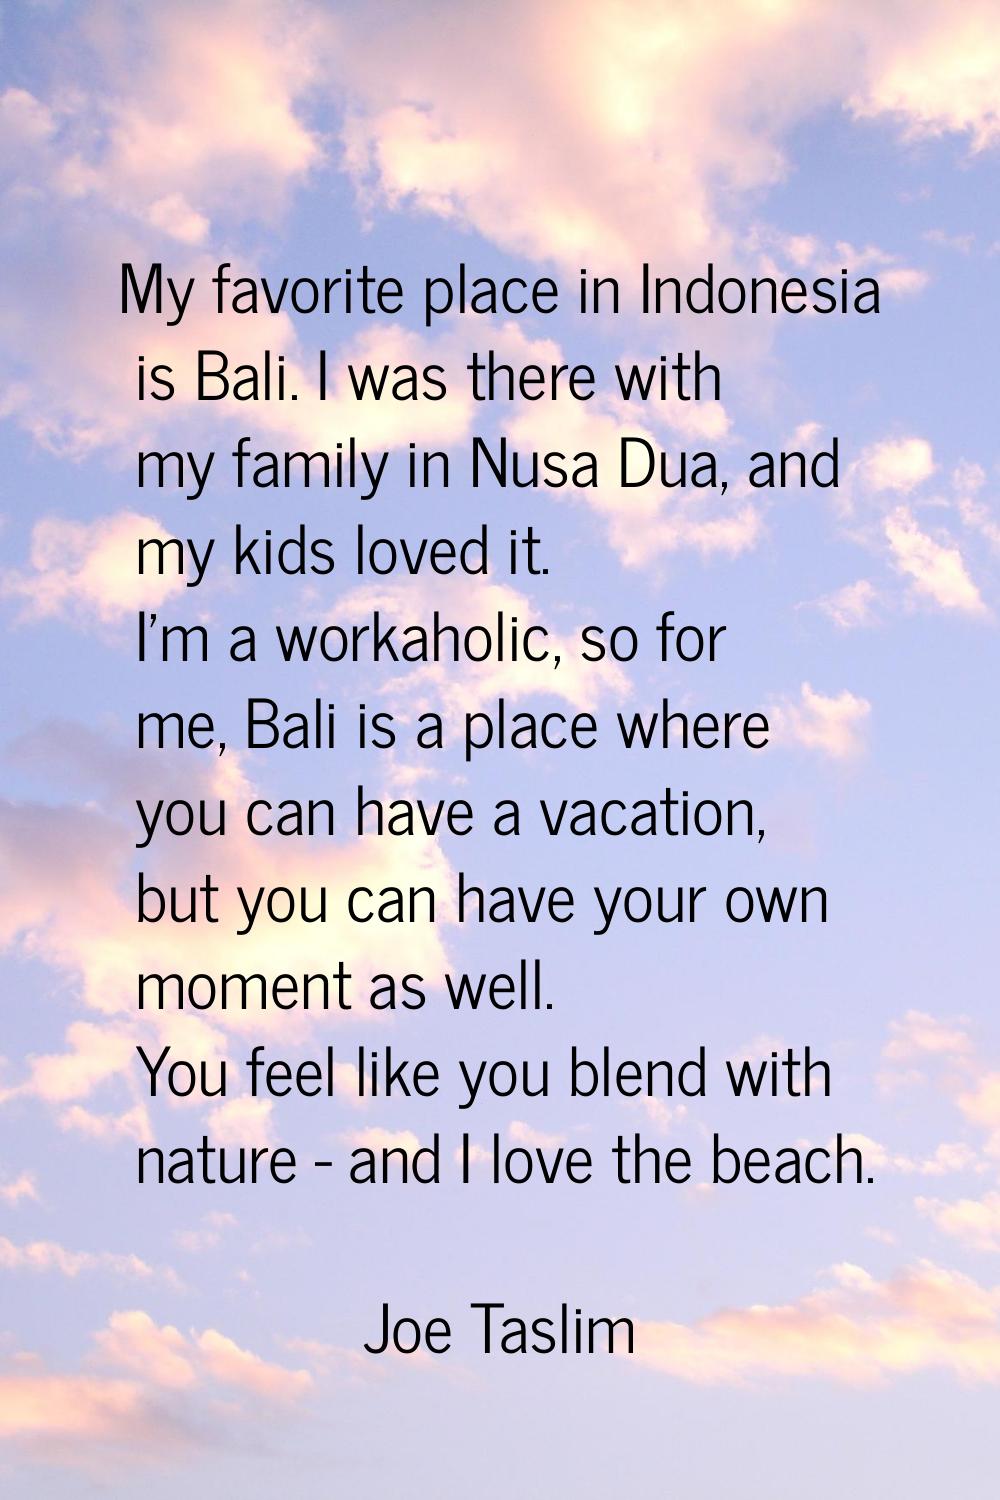 My favorite place in Indonesia is Bali. I was there with my family in Nusa Dua, and my kids loved i